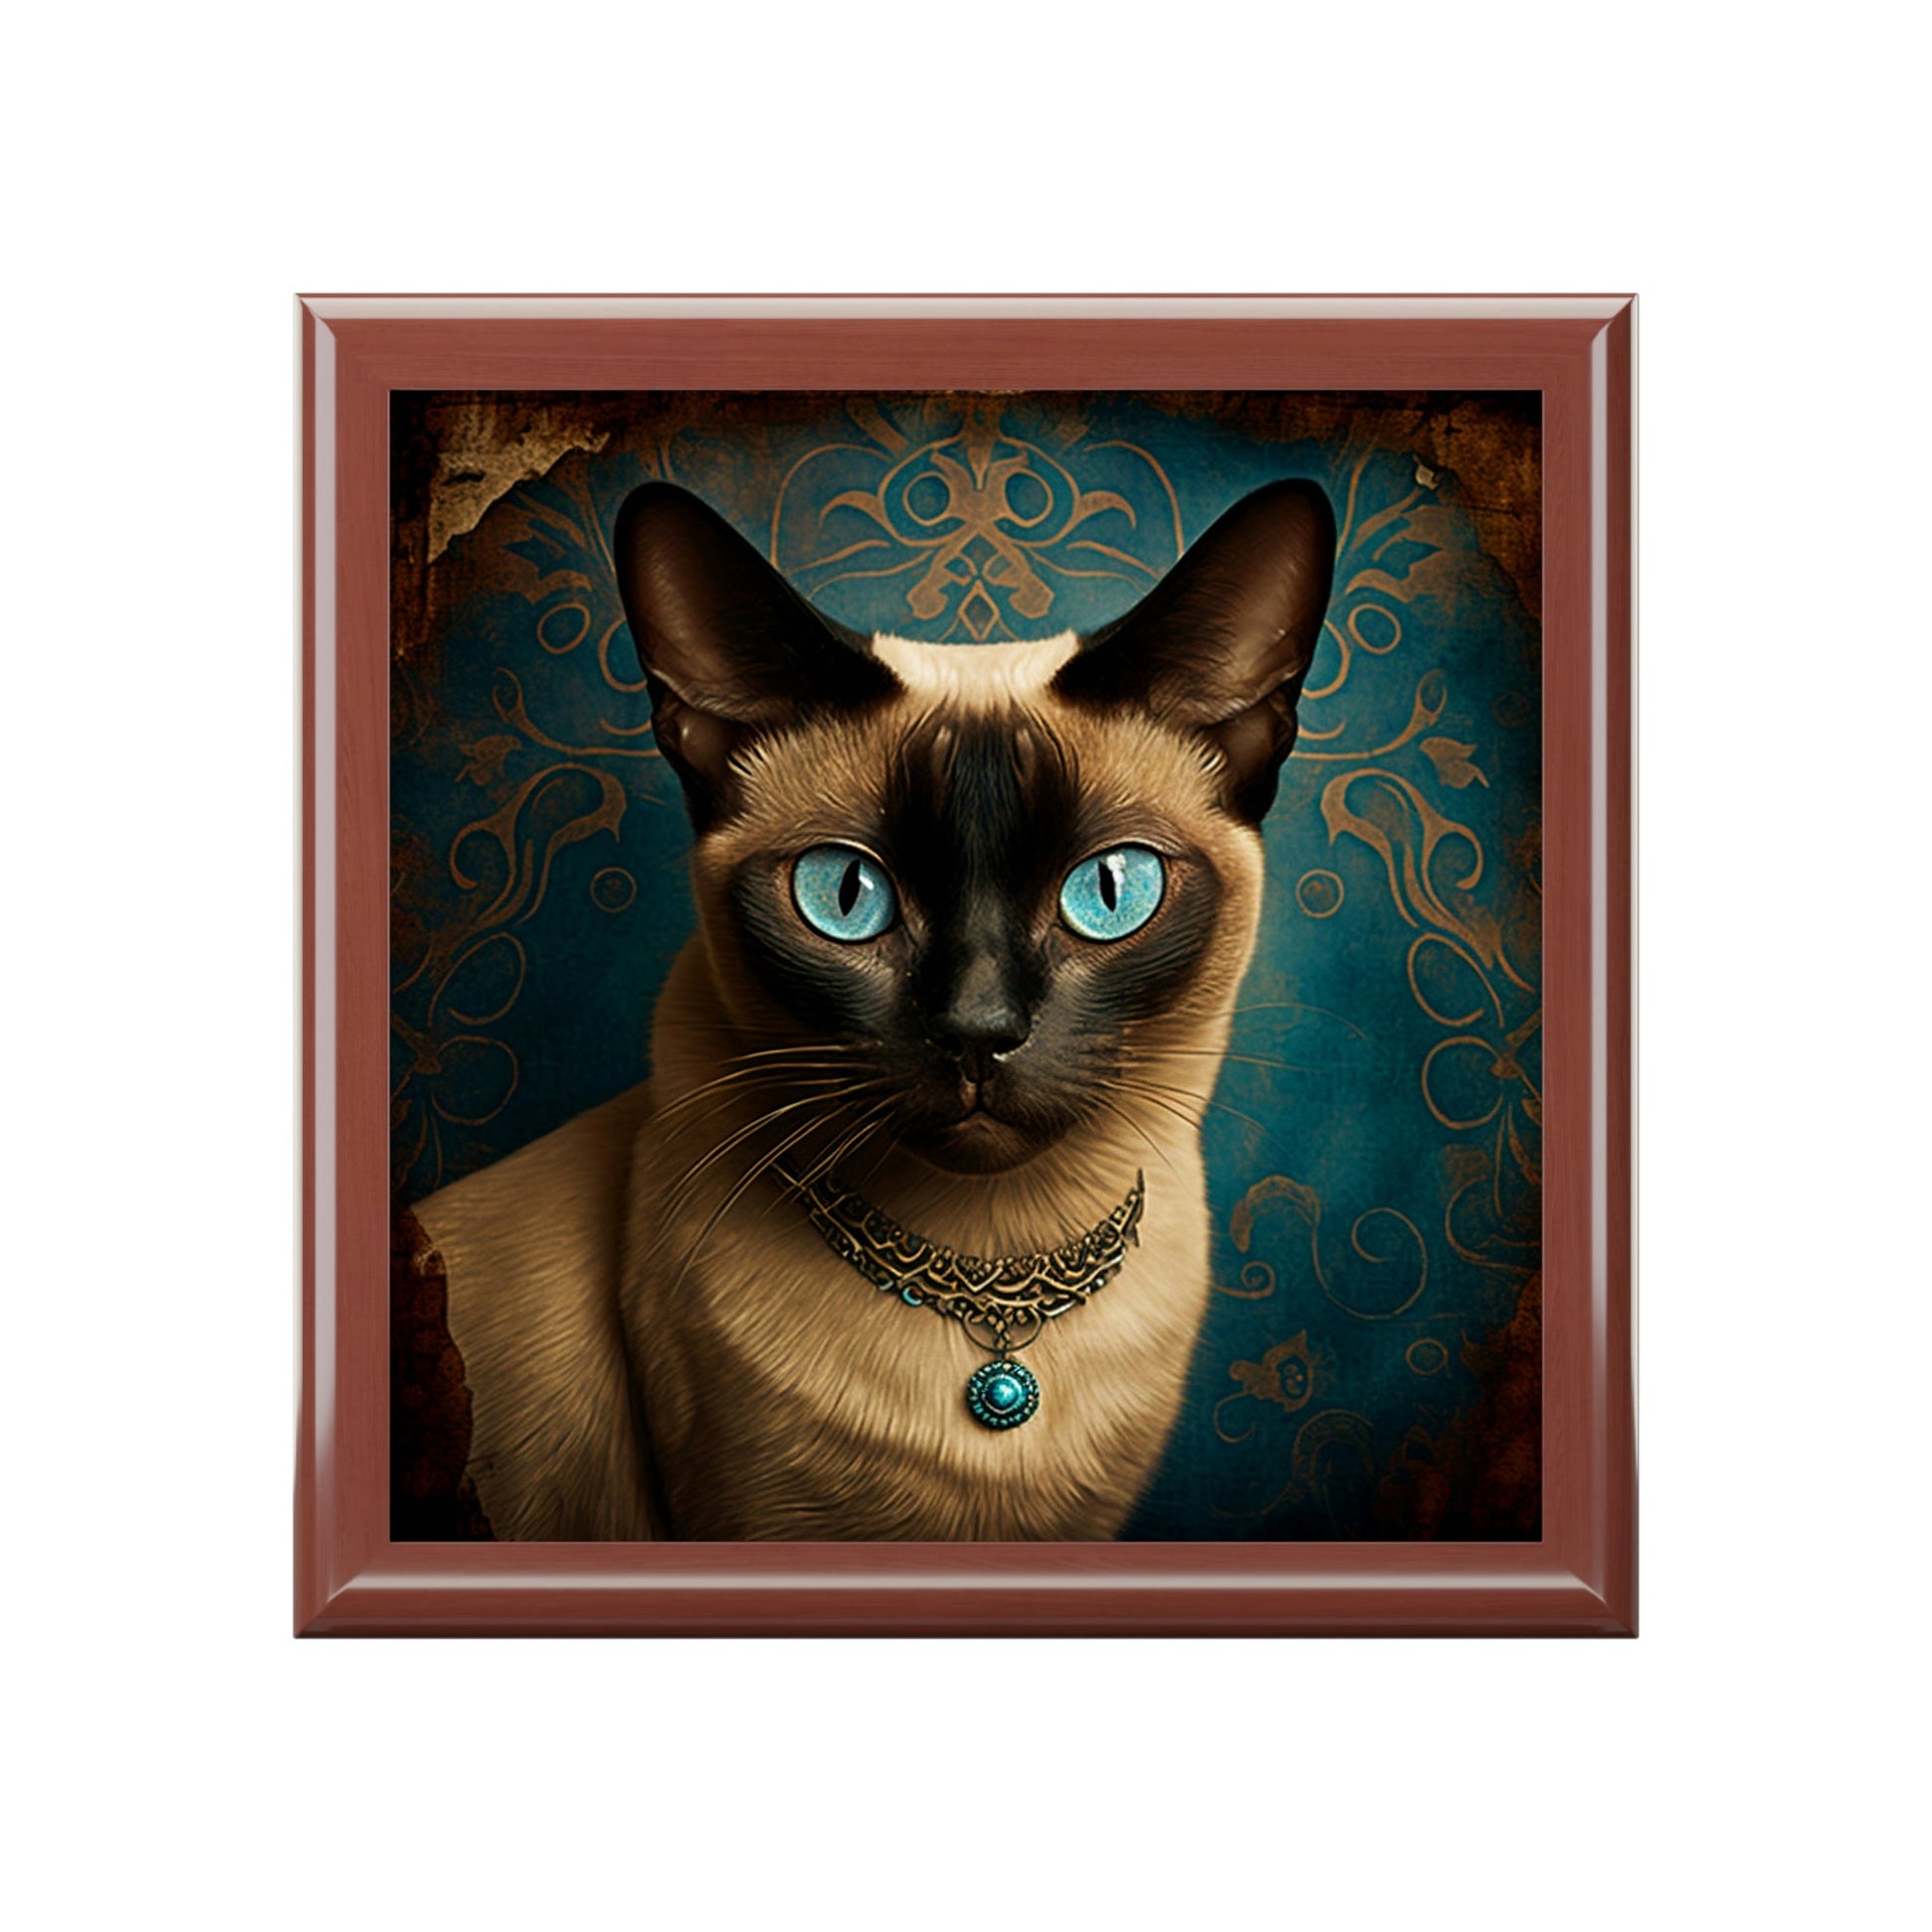 Siamese Cat Jewelry Keepsake Box - Jewelry Travel Case,Bridesmaid Proposal Gift,Bridal Party Gift,Jewelry Case,Gifts for Her